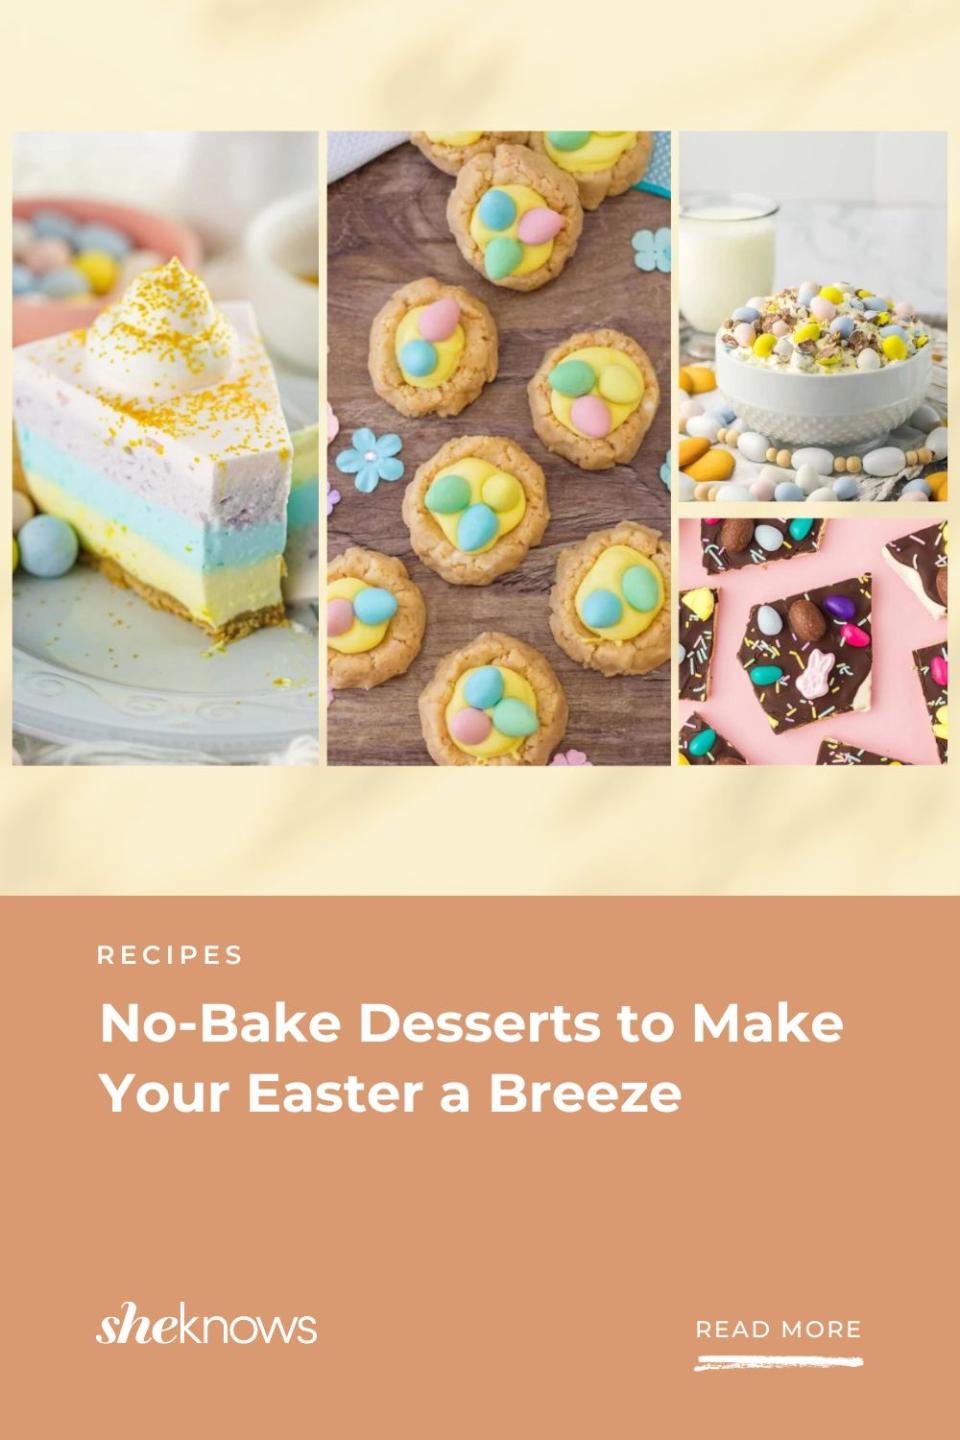 No Bake Desserts To Make Your Easter a Breeze